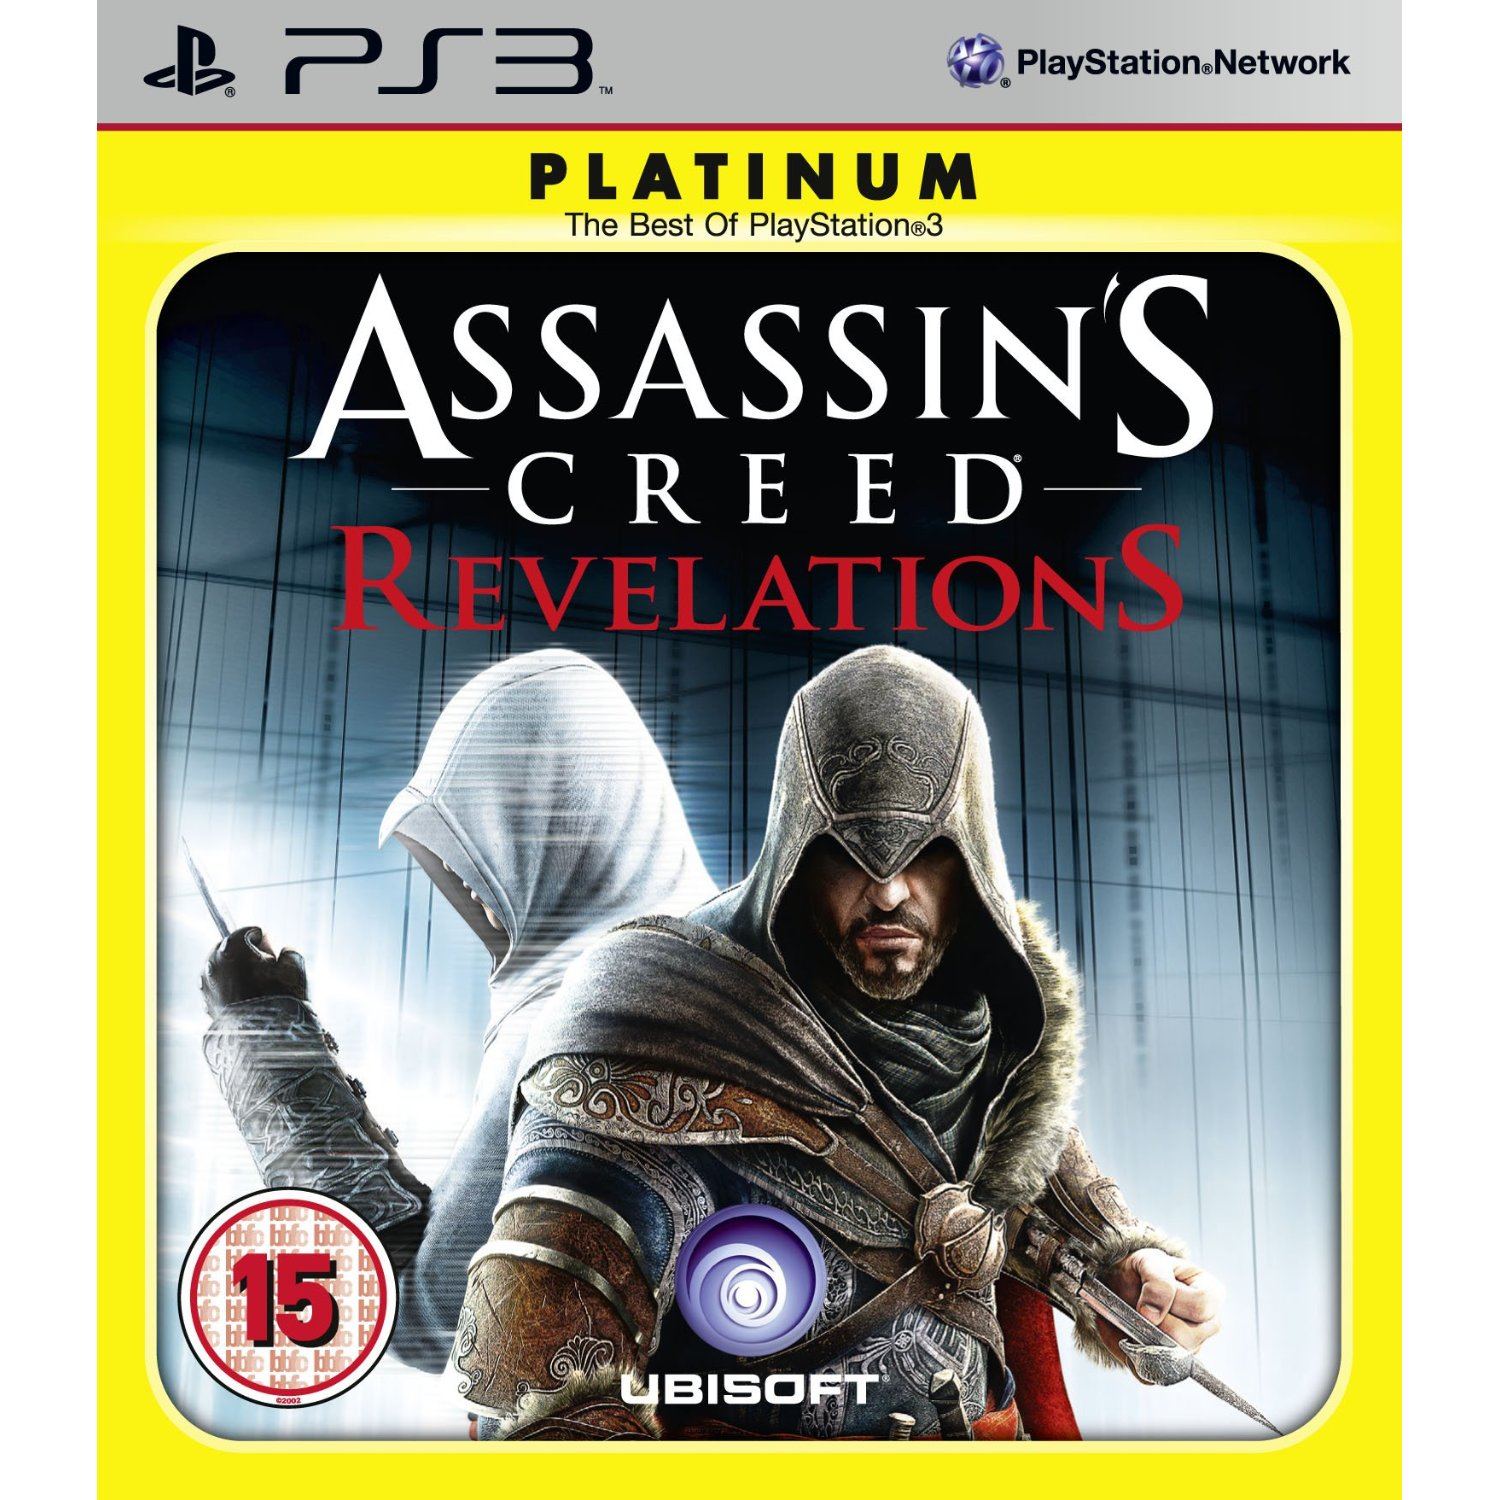 ASSASSIN'S CREED PLATINUM Edition - Playstation 3 PS3 - Complete